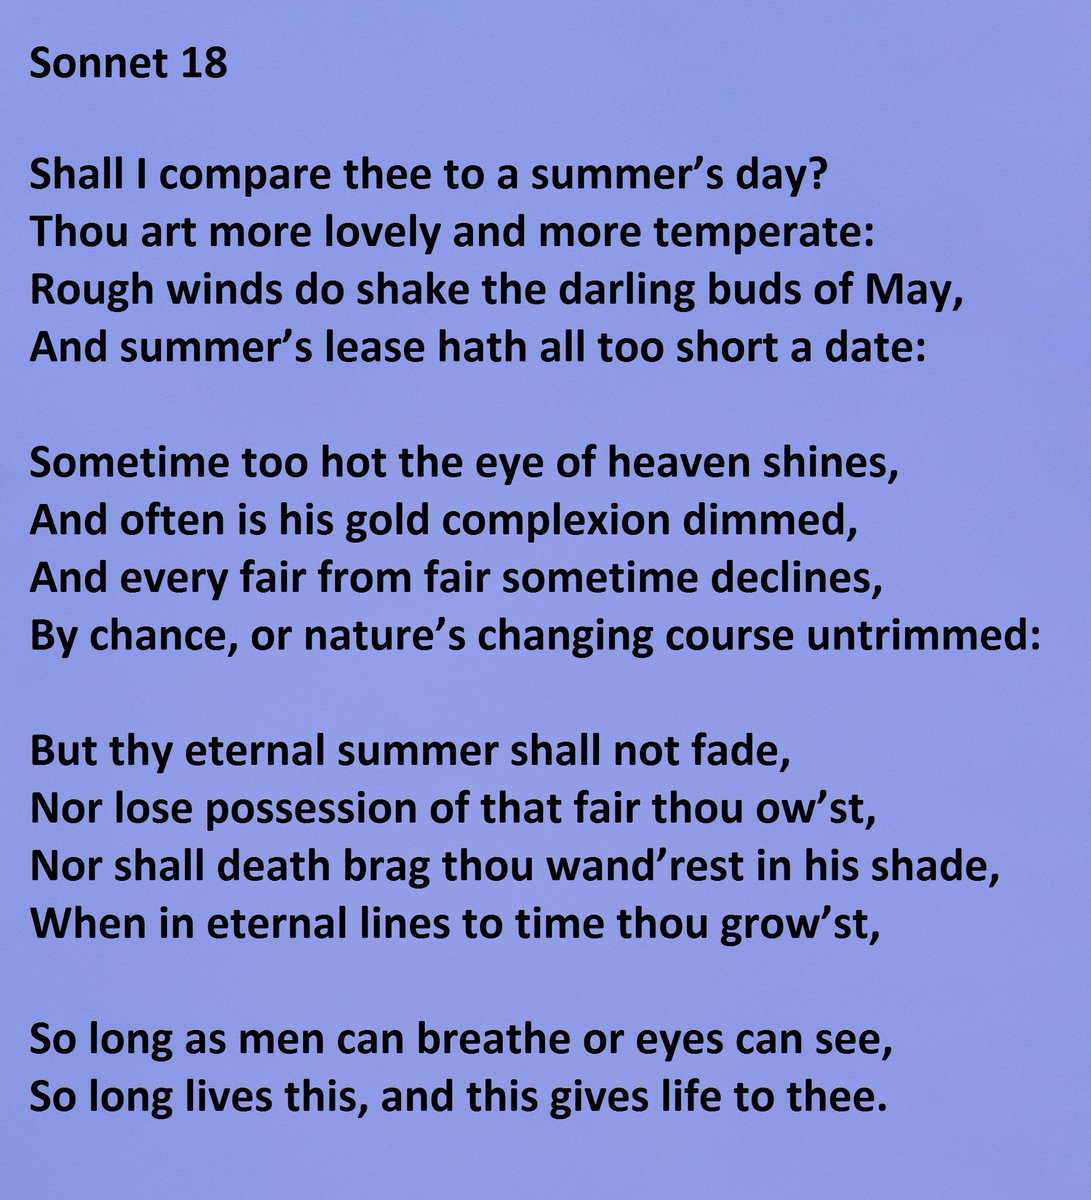 Sonnet 18 by William Shakespeare "Shall I compare thee to a summer's day?"